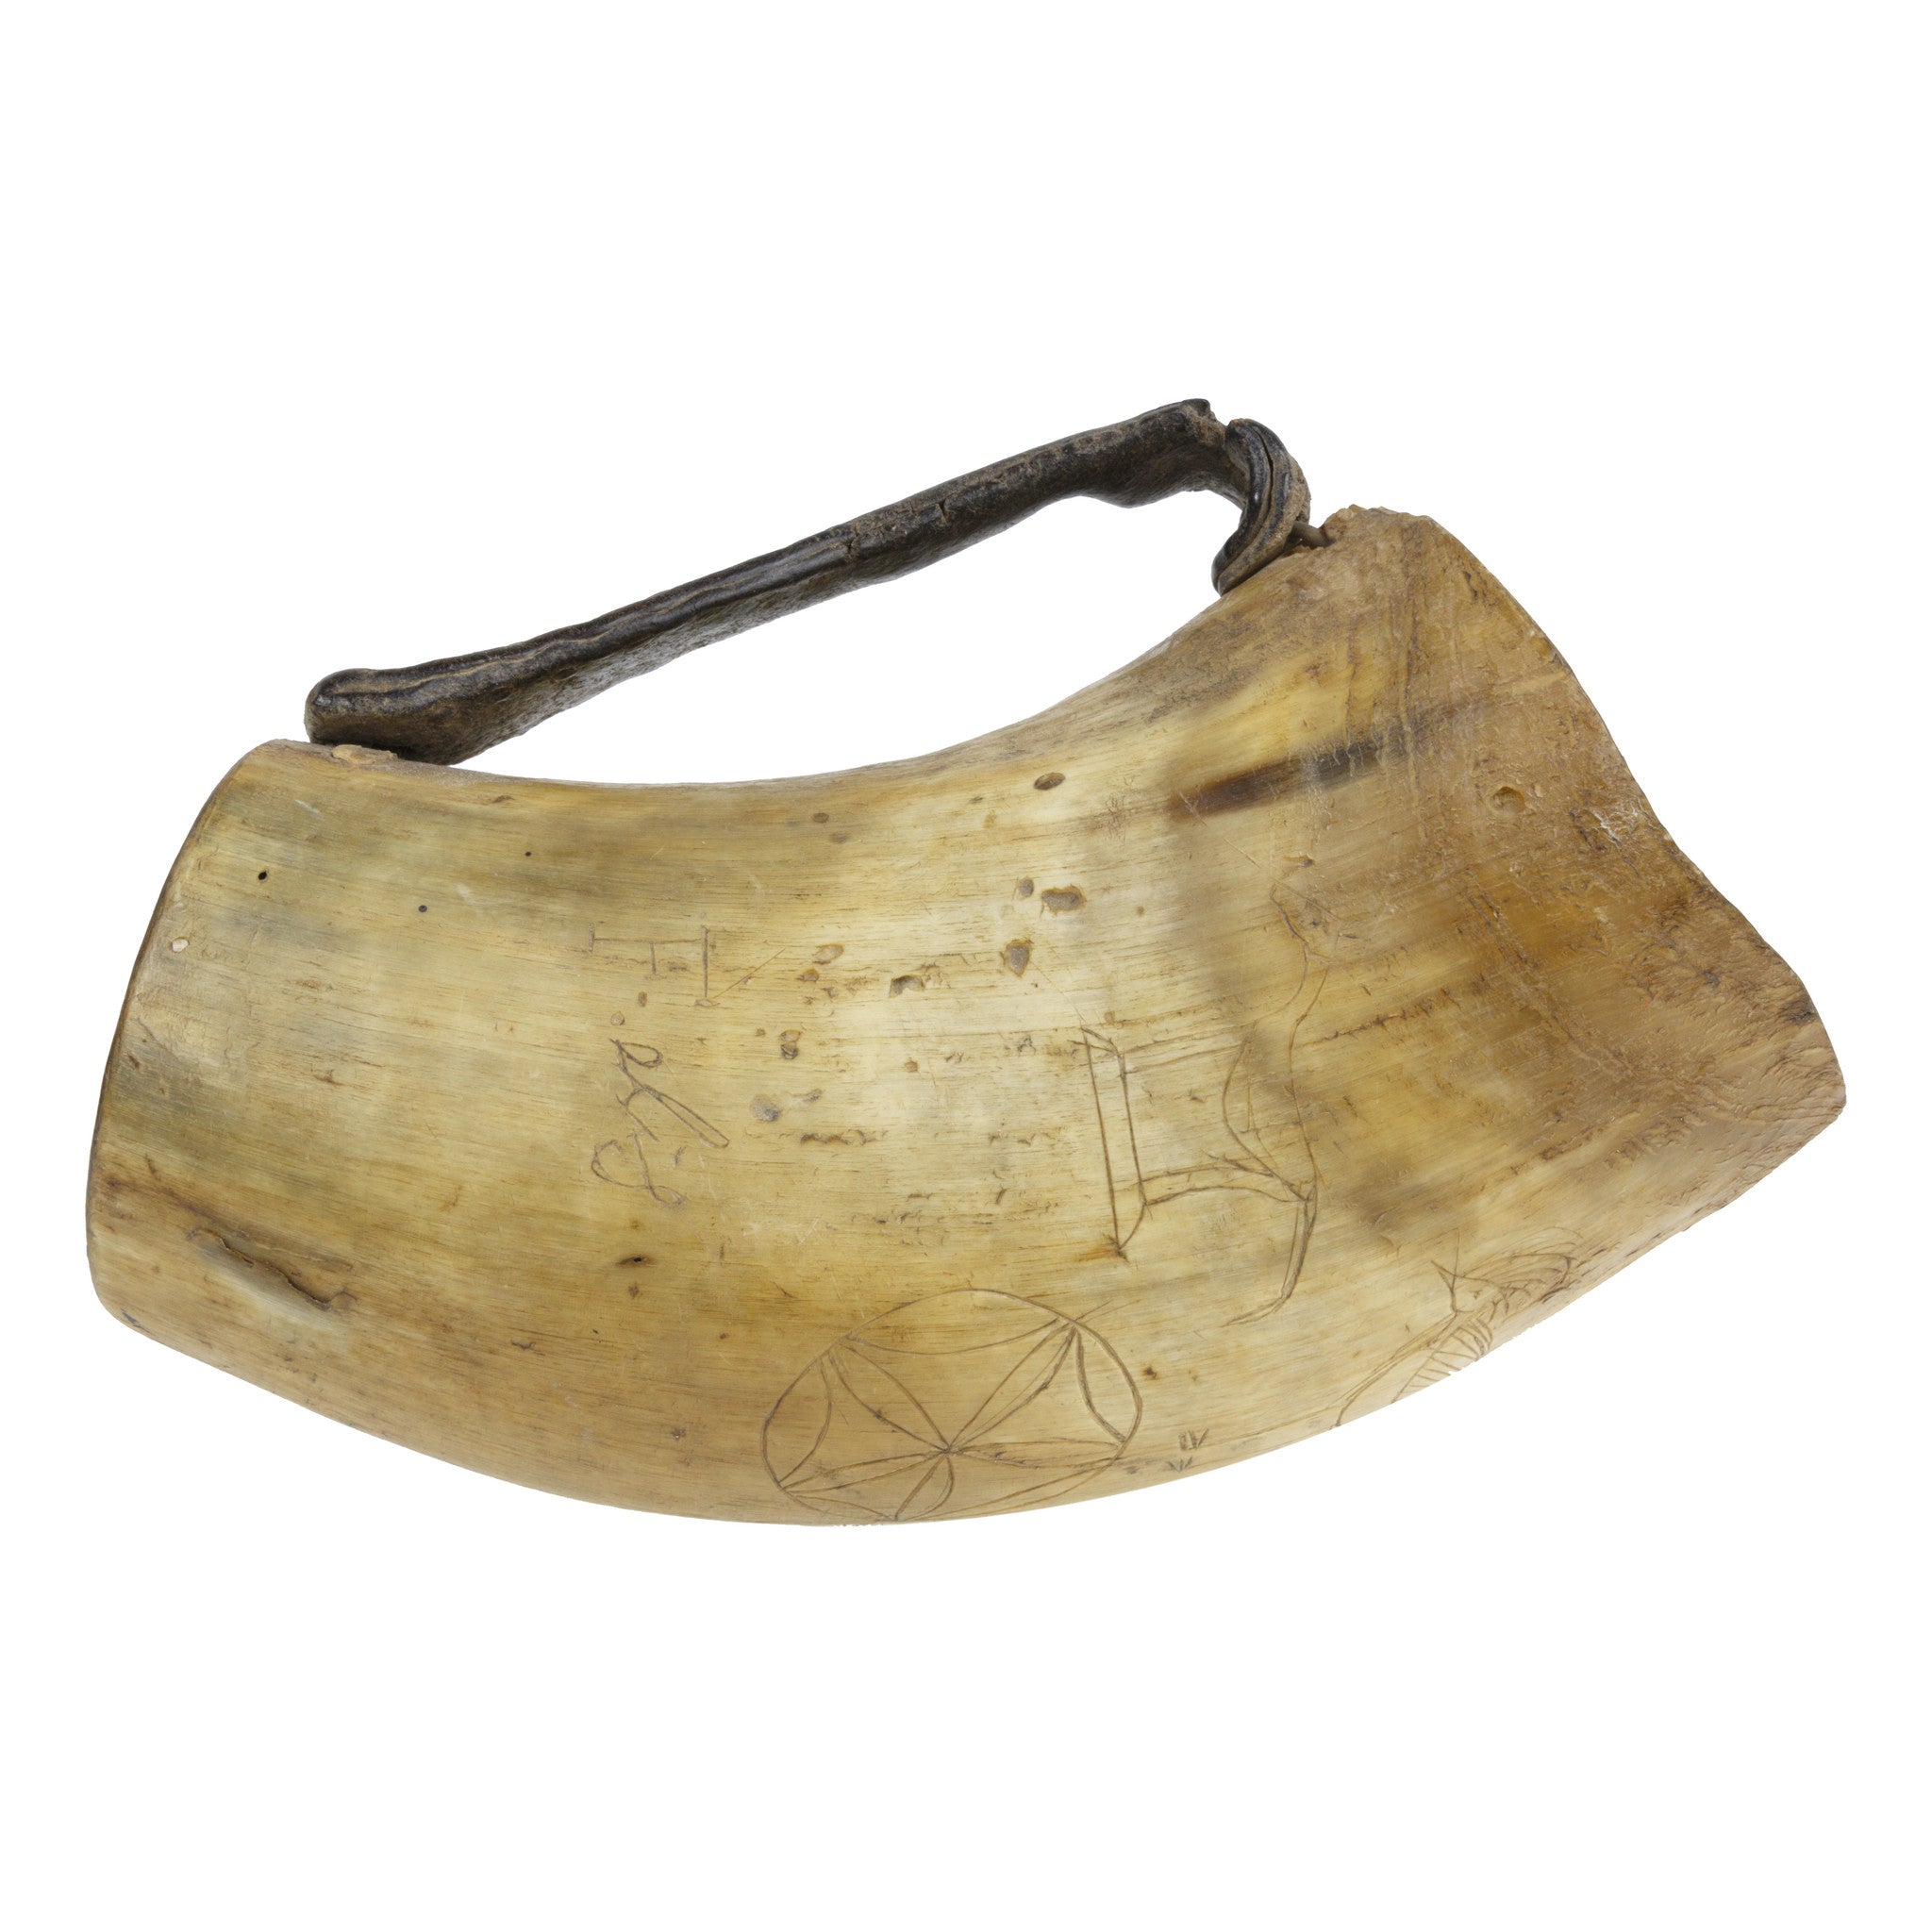 Early American Ox Horn Drinking Cup